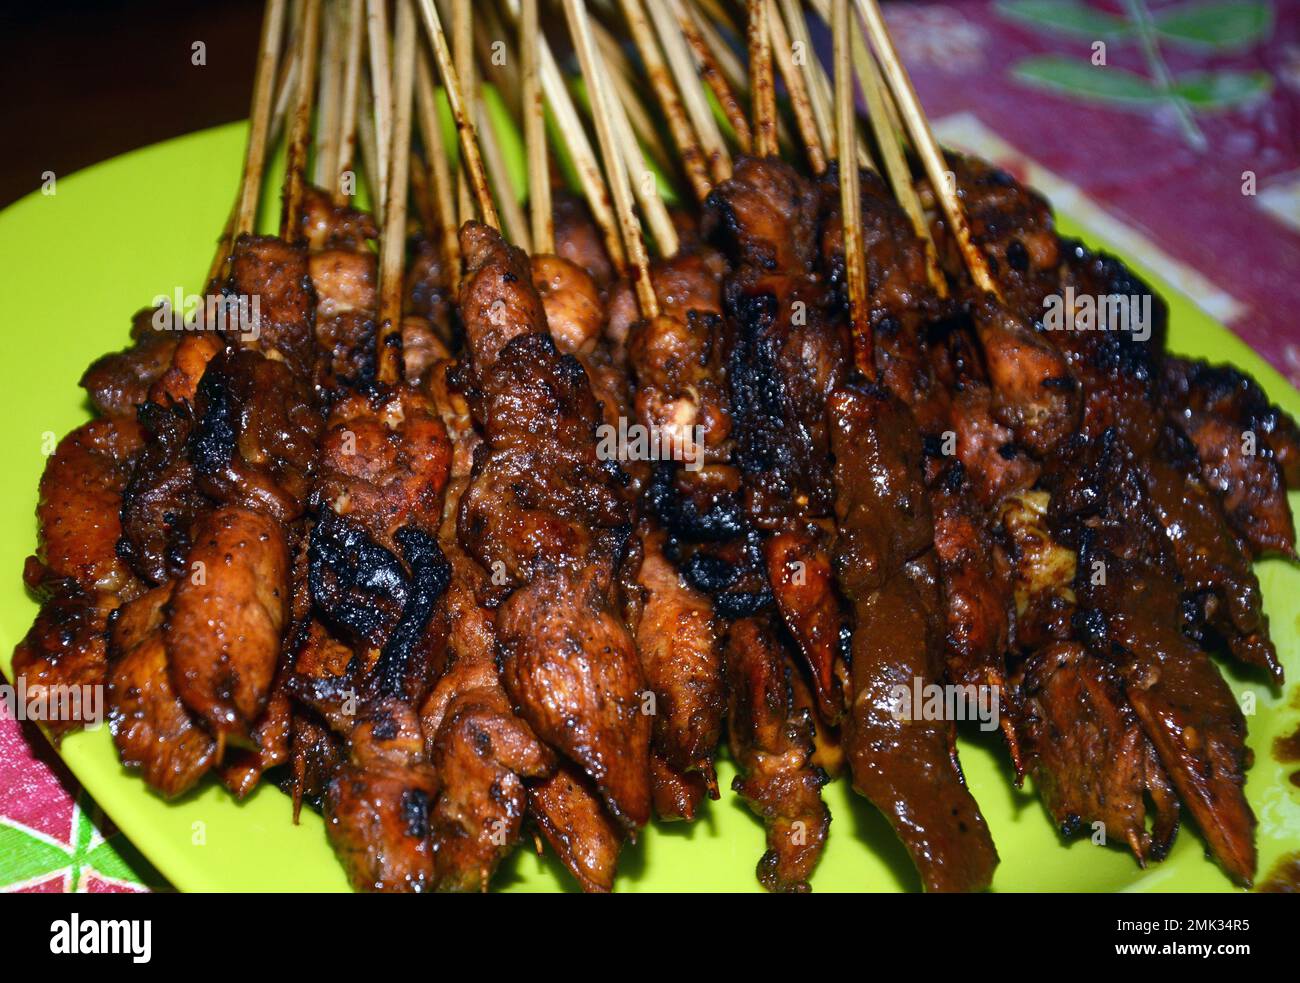 Close up photo of chicken satay, a dish of grilled meat and served with peanut sauce Stock Photo